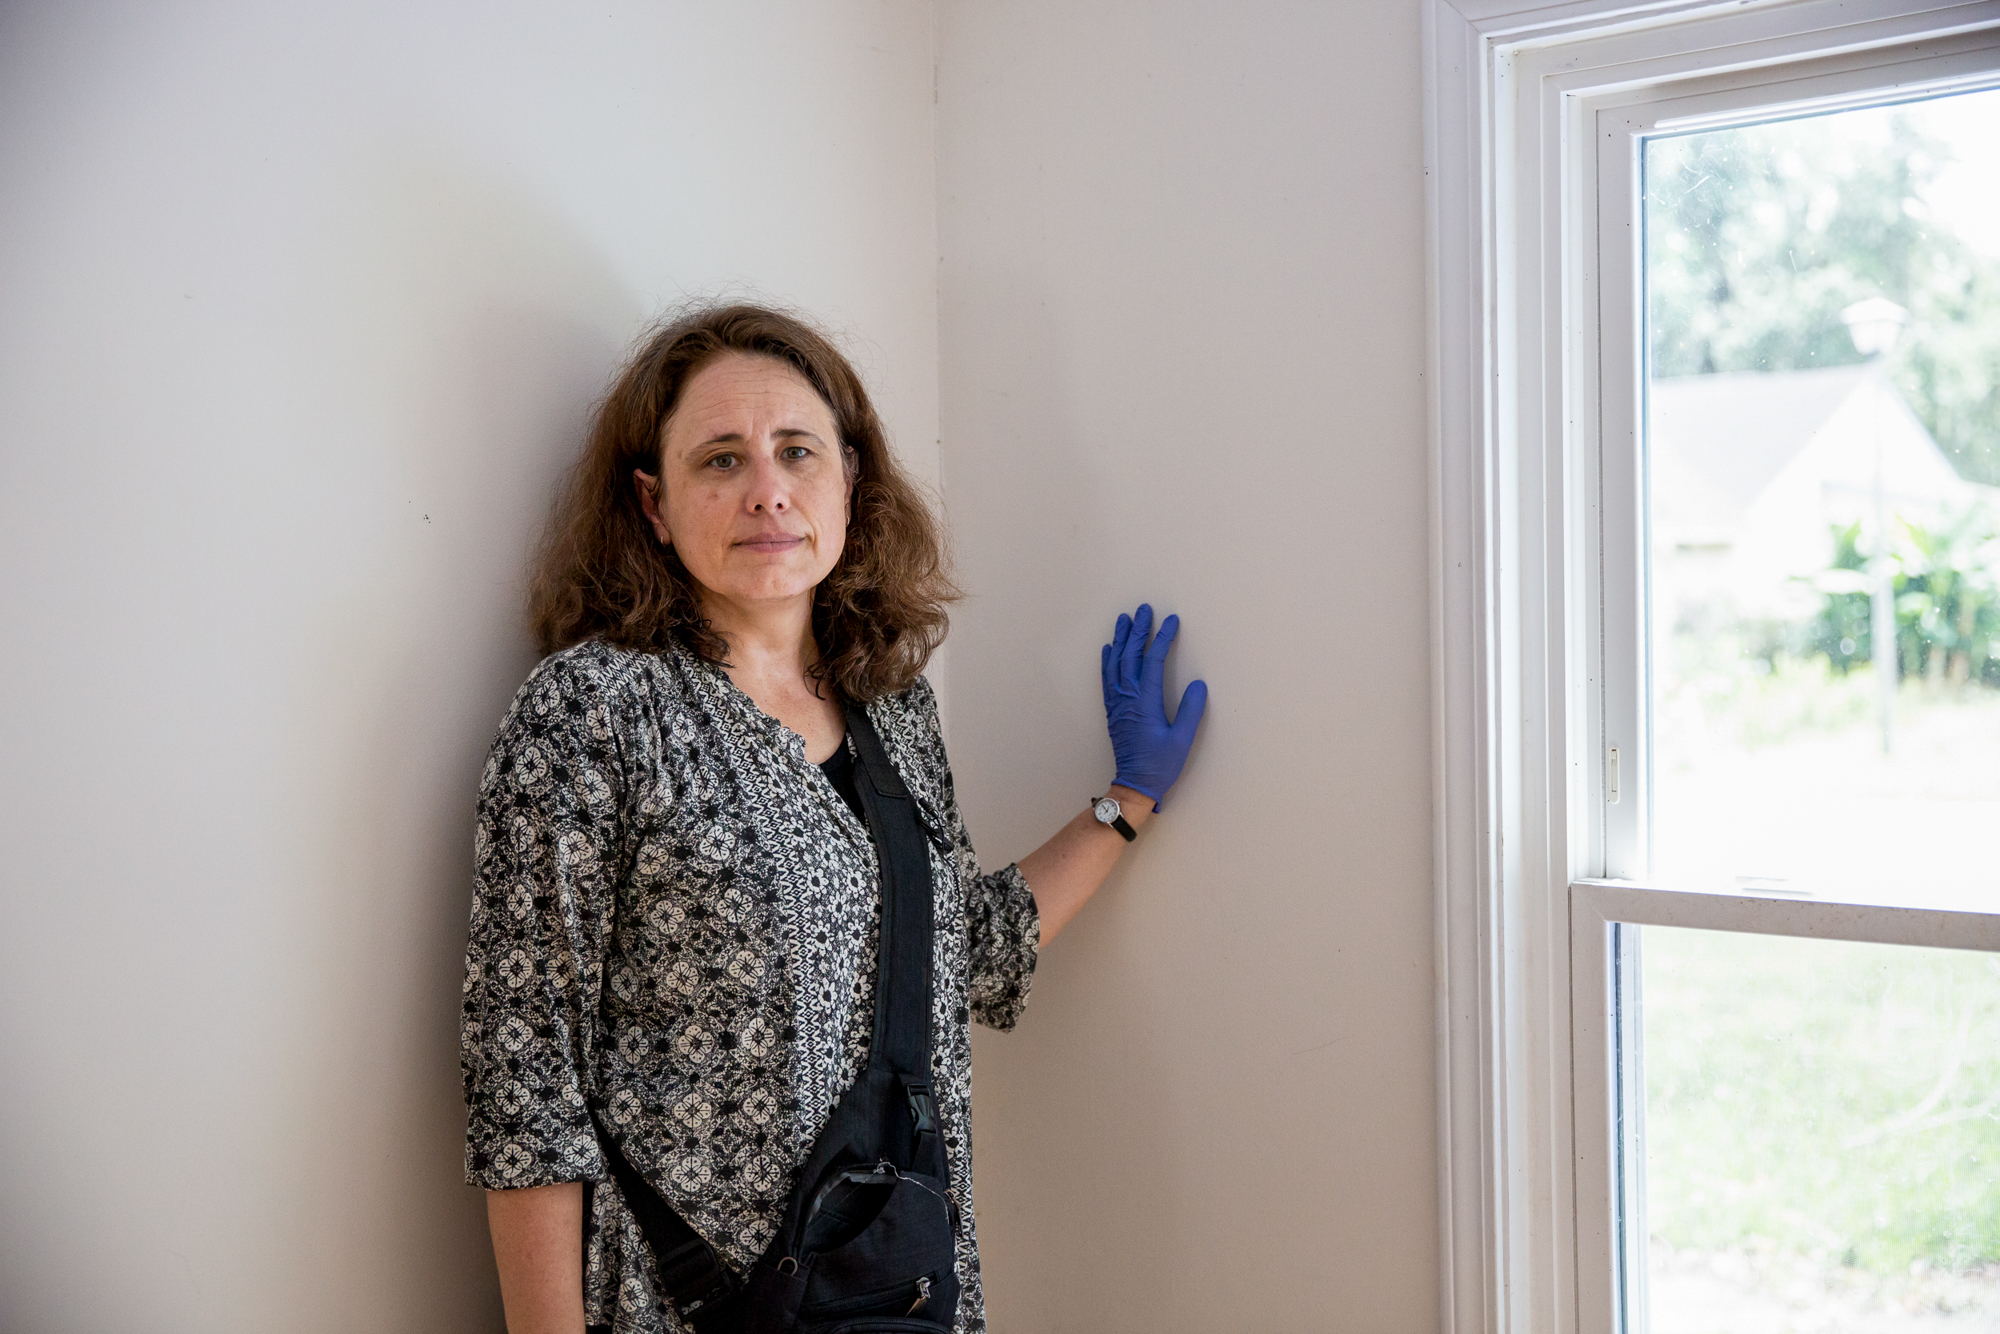 Ana Zimmerman - Ana Zimmerman, an immunologist, discovered mold within the walls of her home after floods in Charleston, South Carolina. “I had my child living in that bedroom for years, and we thought our child had allergies; pollen allergies,” Zimmerman said. “When we ripped open the walls, they were filled with mold.” The mold has gave her child respiratory issues, and after the family moved out in 2017 Zimmerman became an activist for holding the city accountable for failures to follow building codes. (Ellen O'Brien/News21)